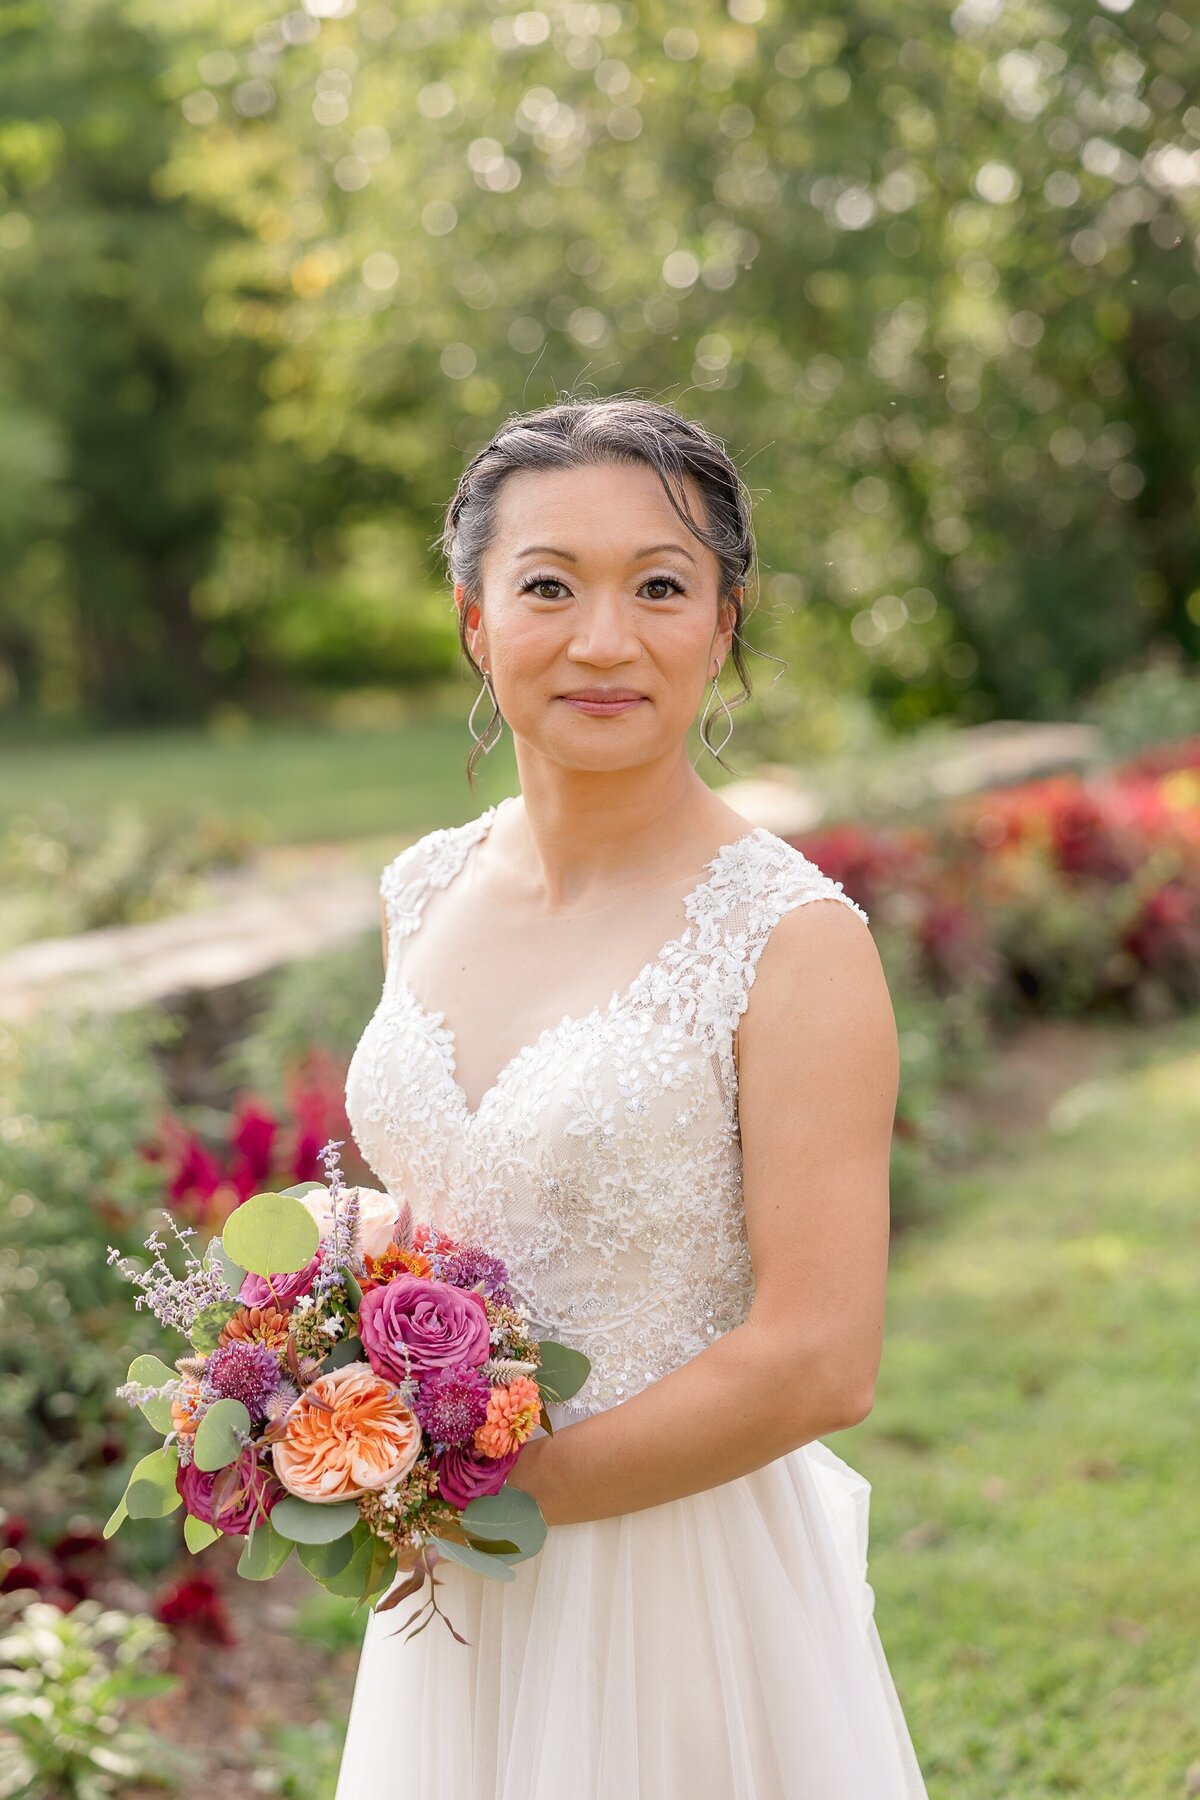 Bride holding a bouquet with different colored flowers stands outside during the springtime in the DMV